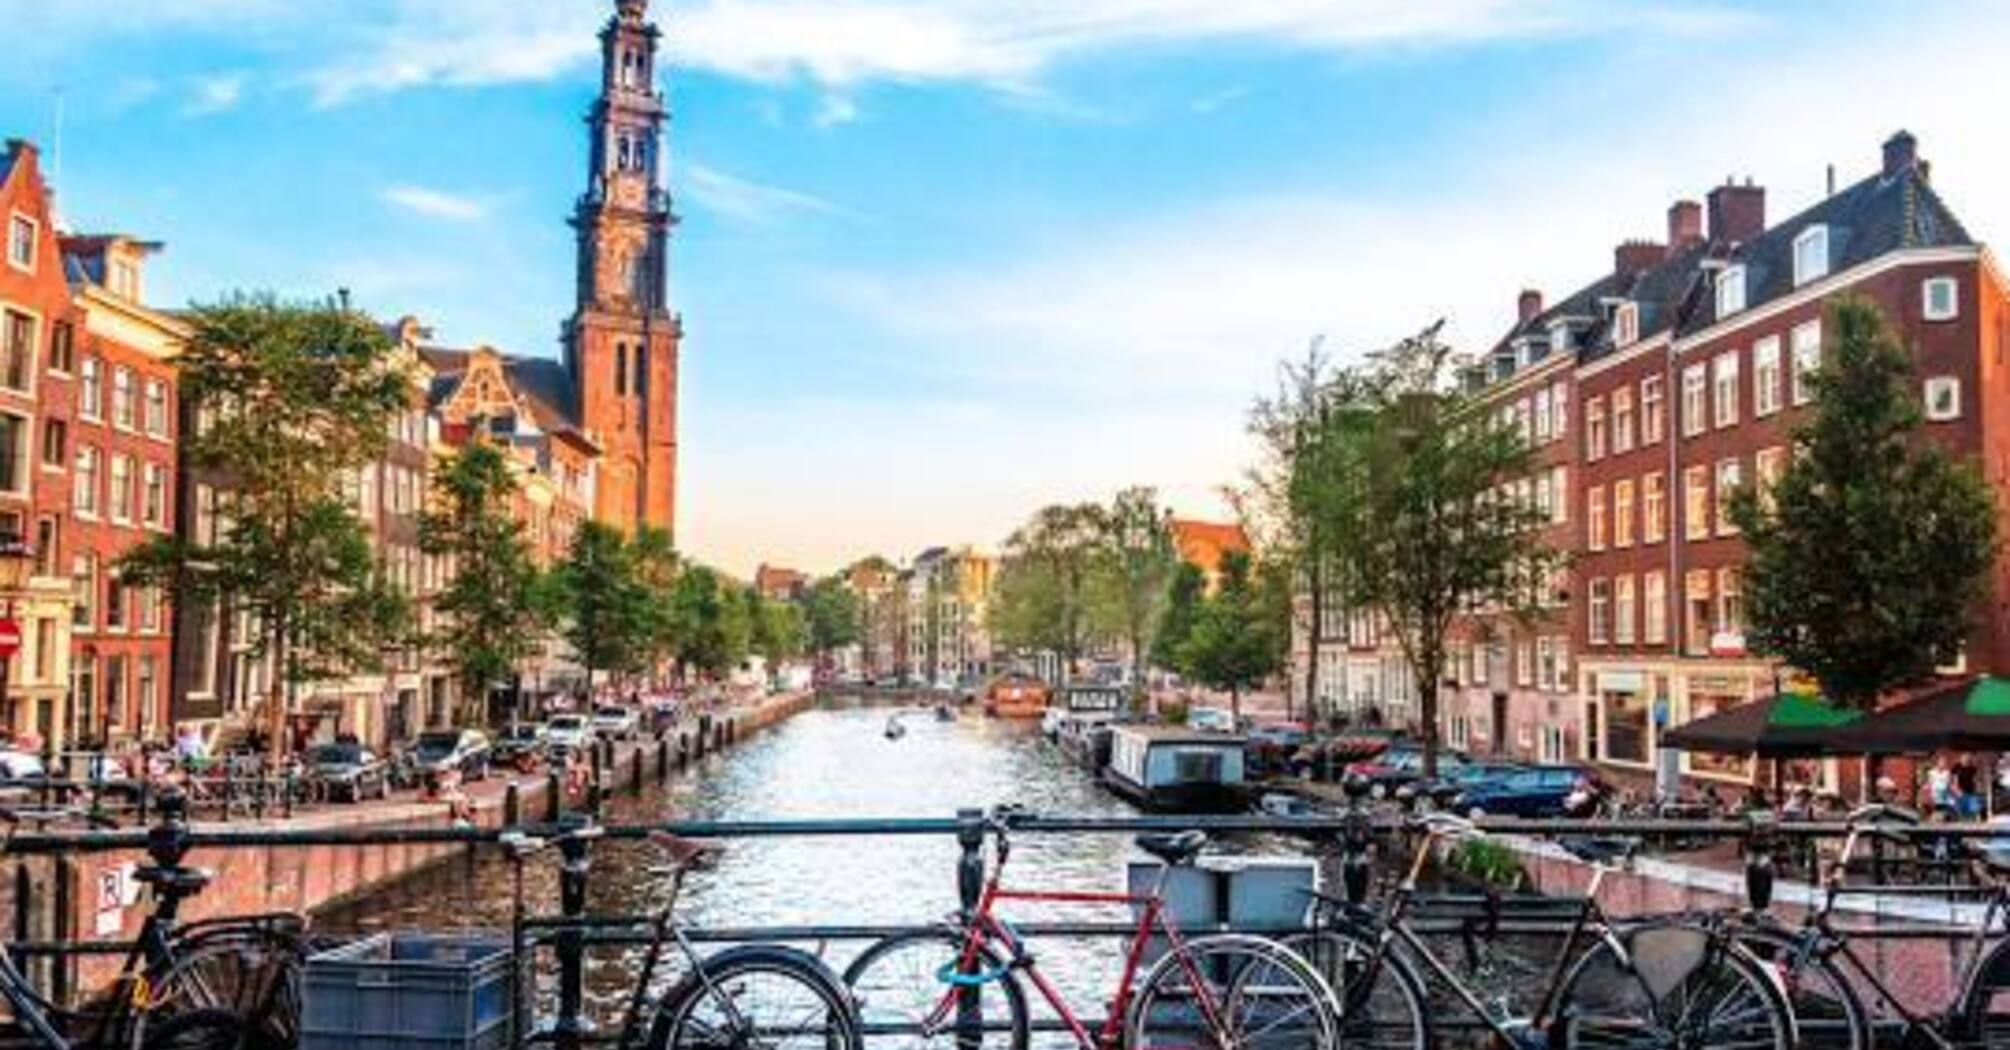 Why you should visit Amsterdam